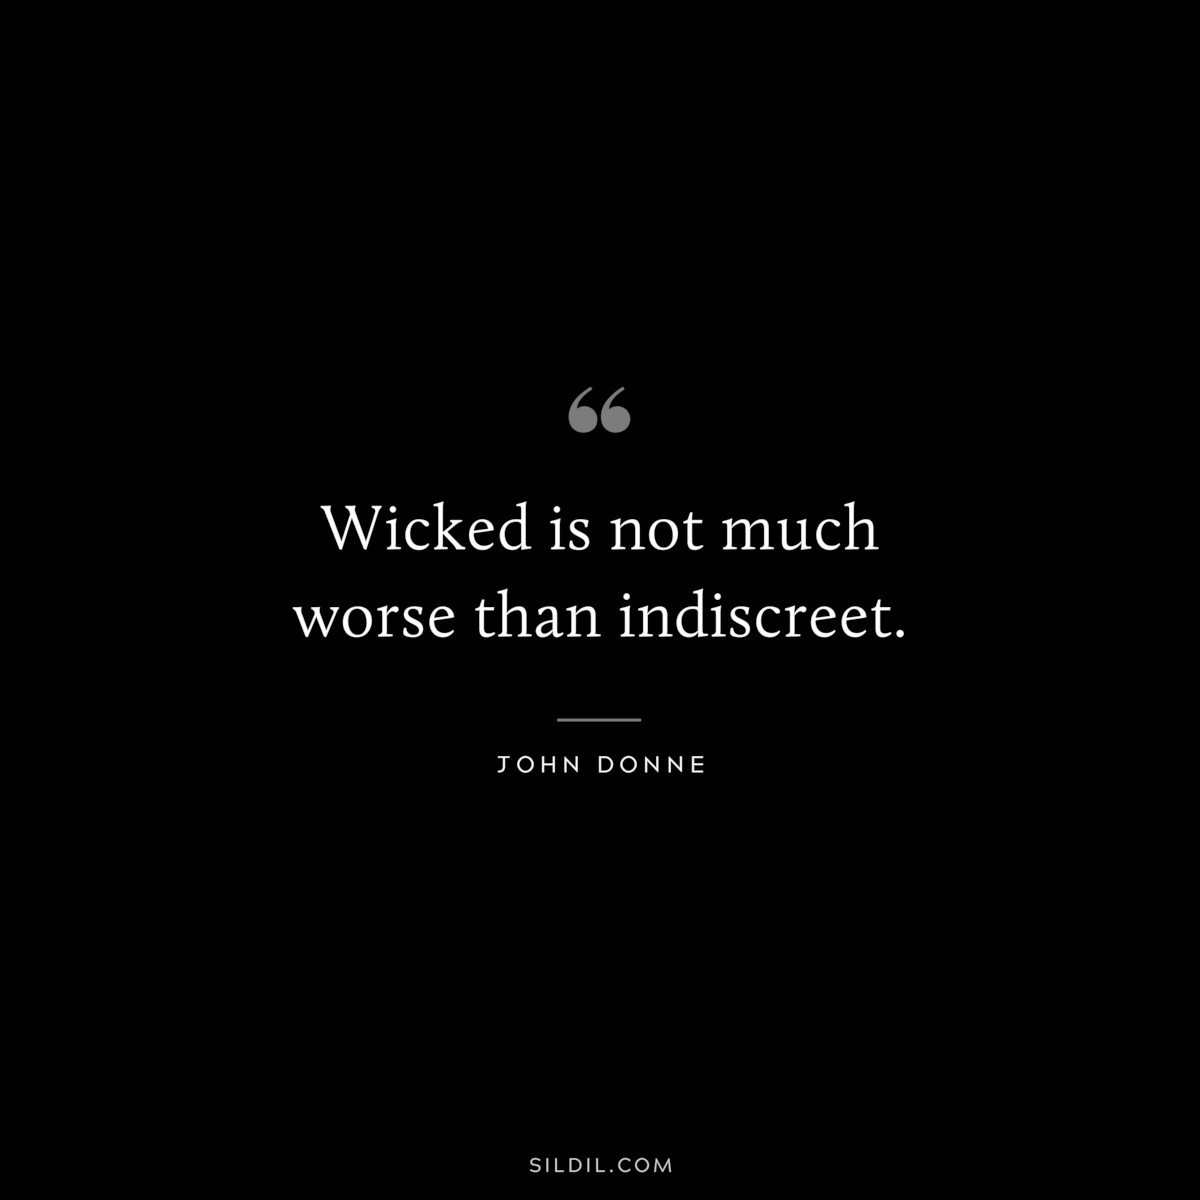 Wicked is not much worse than indiscreet. ― John Donne